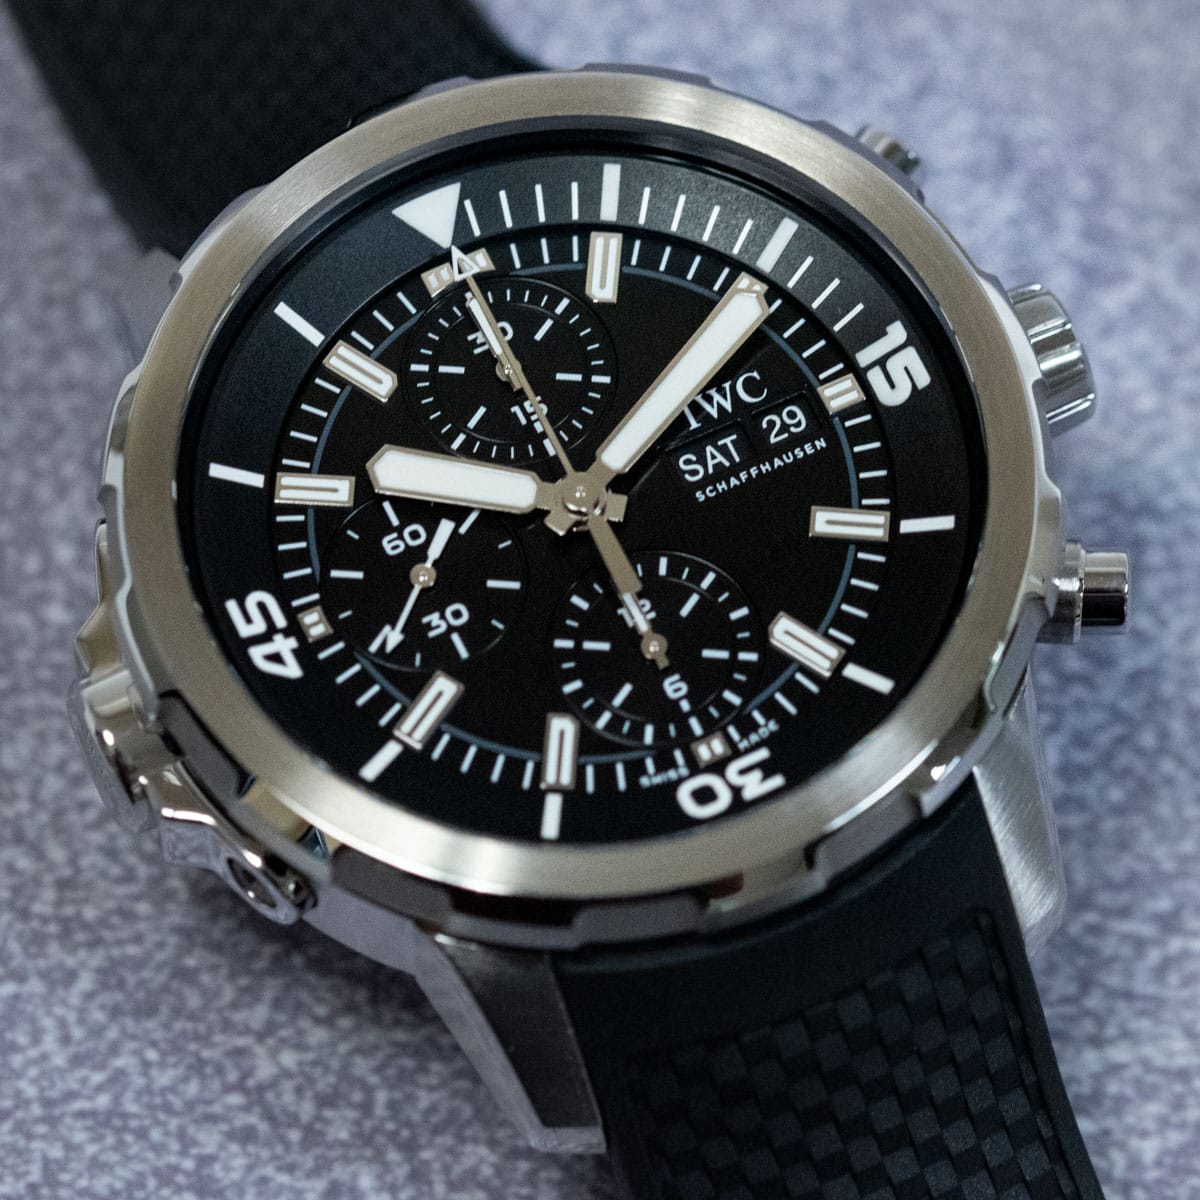 Stylied photo of  of Aquatimer Chronograph